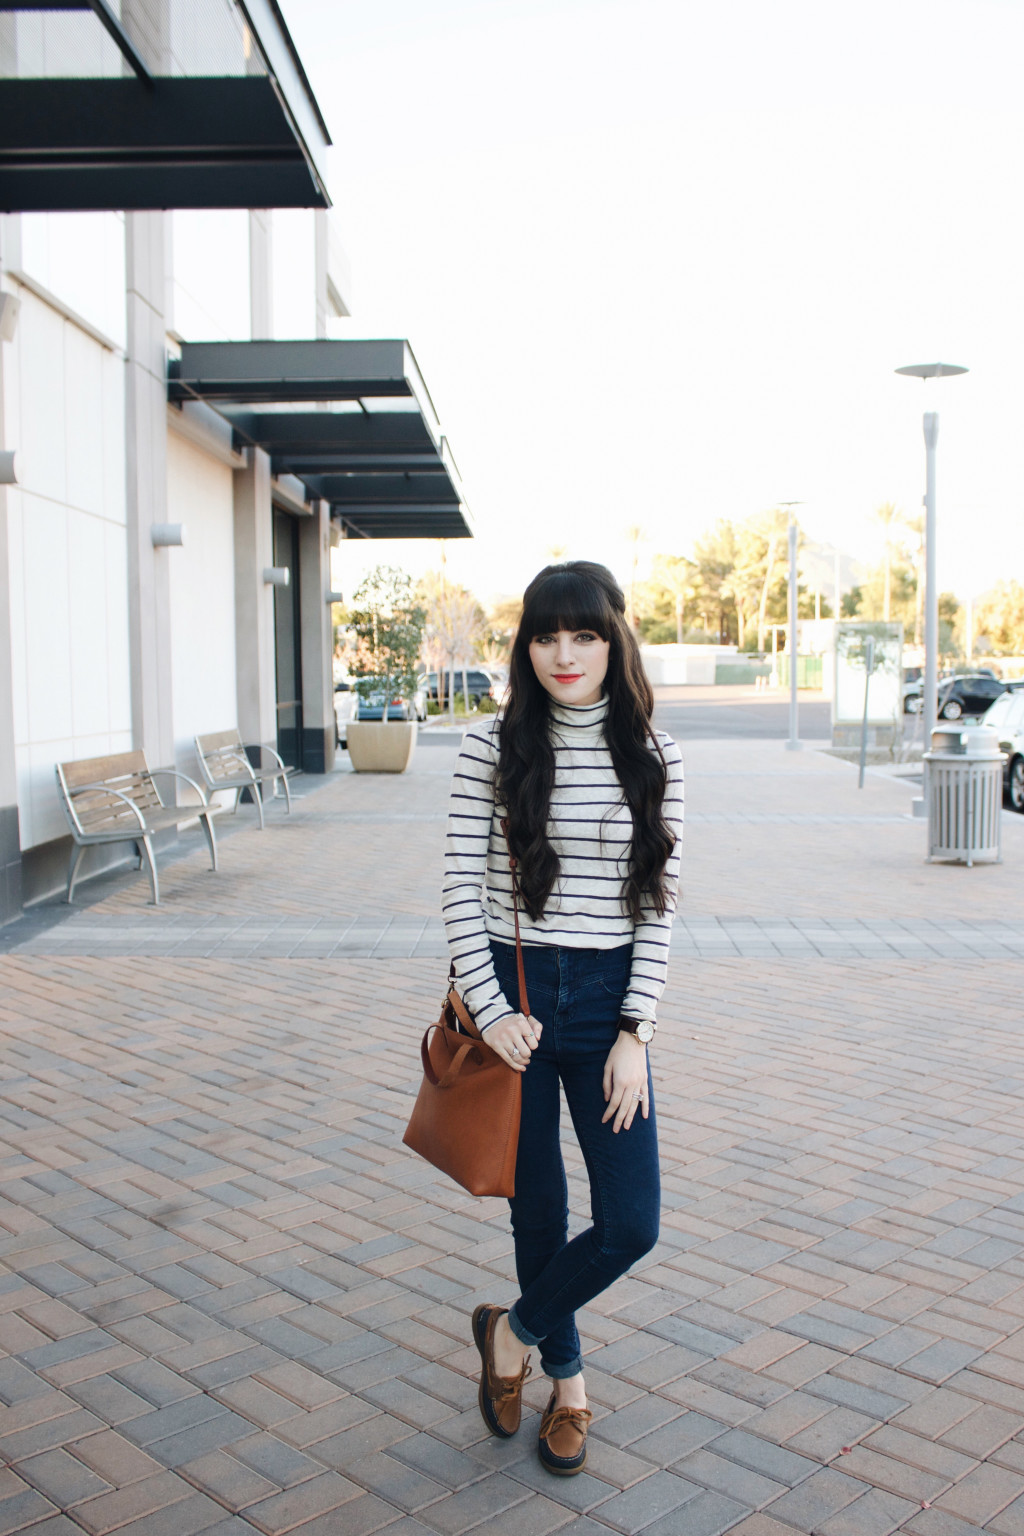 New Darlings - Sperry - Madewell Striped Turtleneck